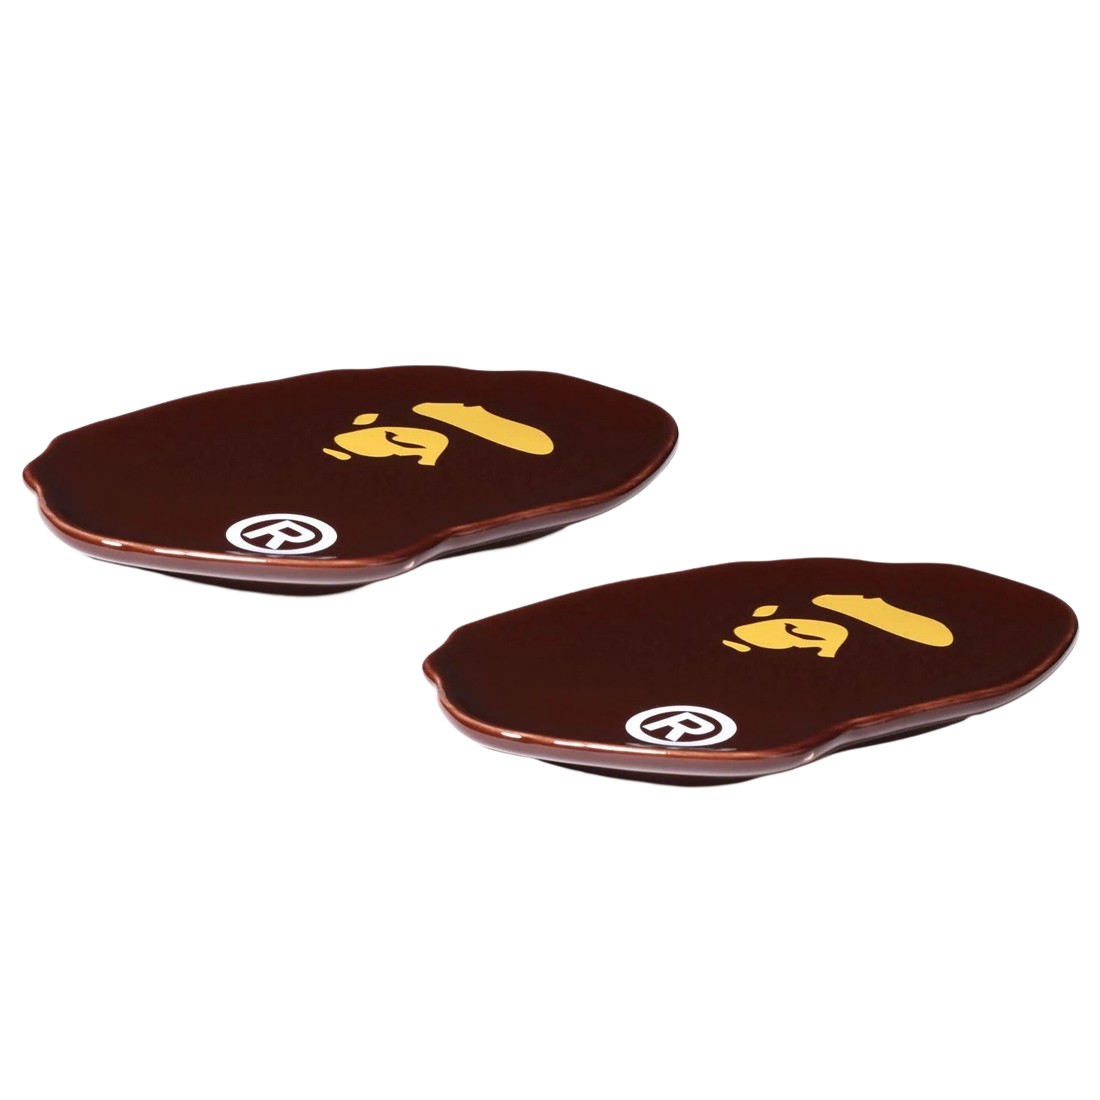 A Bathing Ape Ape Head Small Plate Two Piece Set (brown)